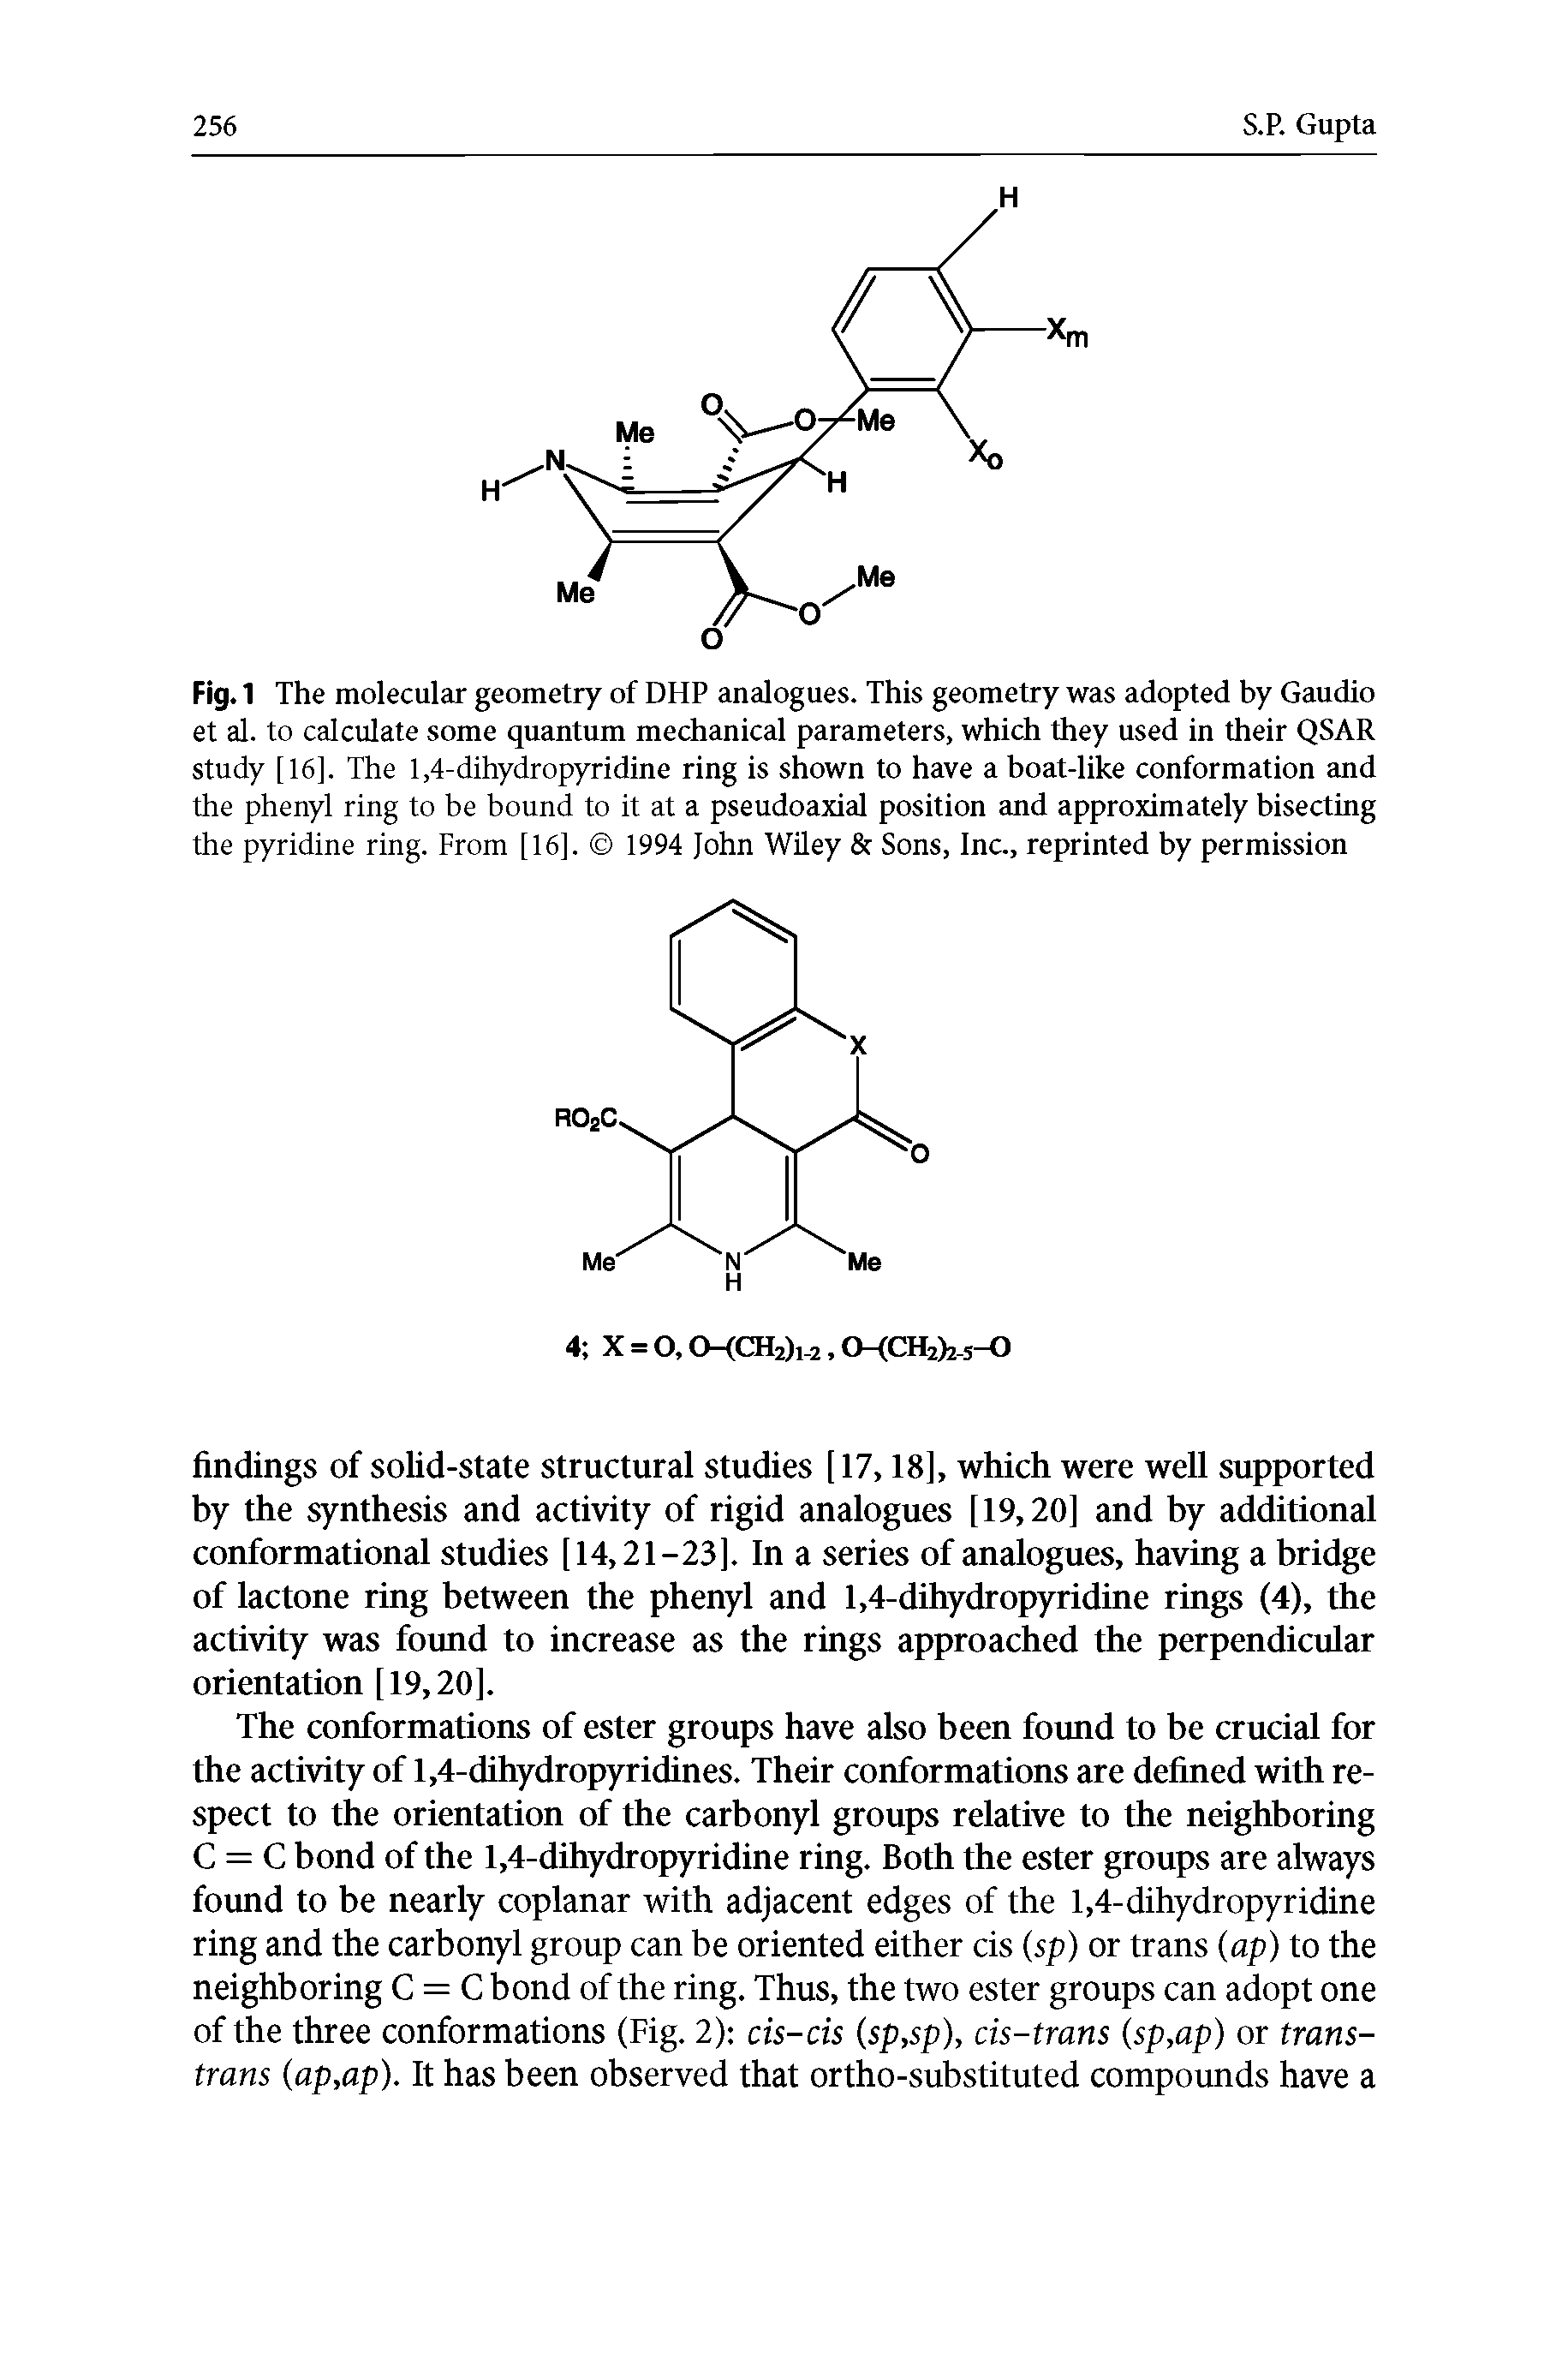 Fig.1 The molecular geometry of DHP analogues. This geometry was adopted by Gaudio et al. to calculate some quantum mechanical parameters, which they used in their QSAR study [16]. The 1,4-dihydropyridine ring is shown to have a boat-like conformation and the phenyl ring to be bound to it at a pseudoaxial position and approximately bisecting the pyridine ring. From [16]. 1994 John Wiley Sons, Inc., reprinted by permission...